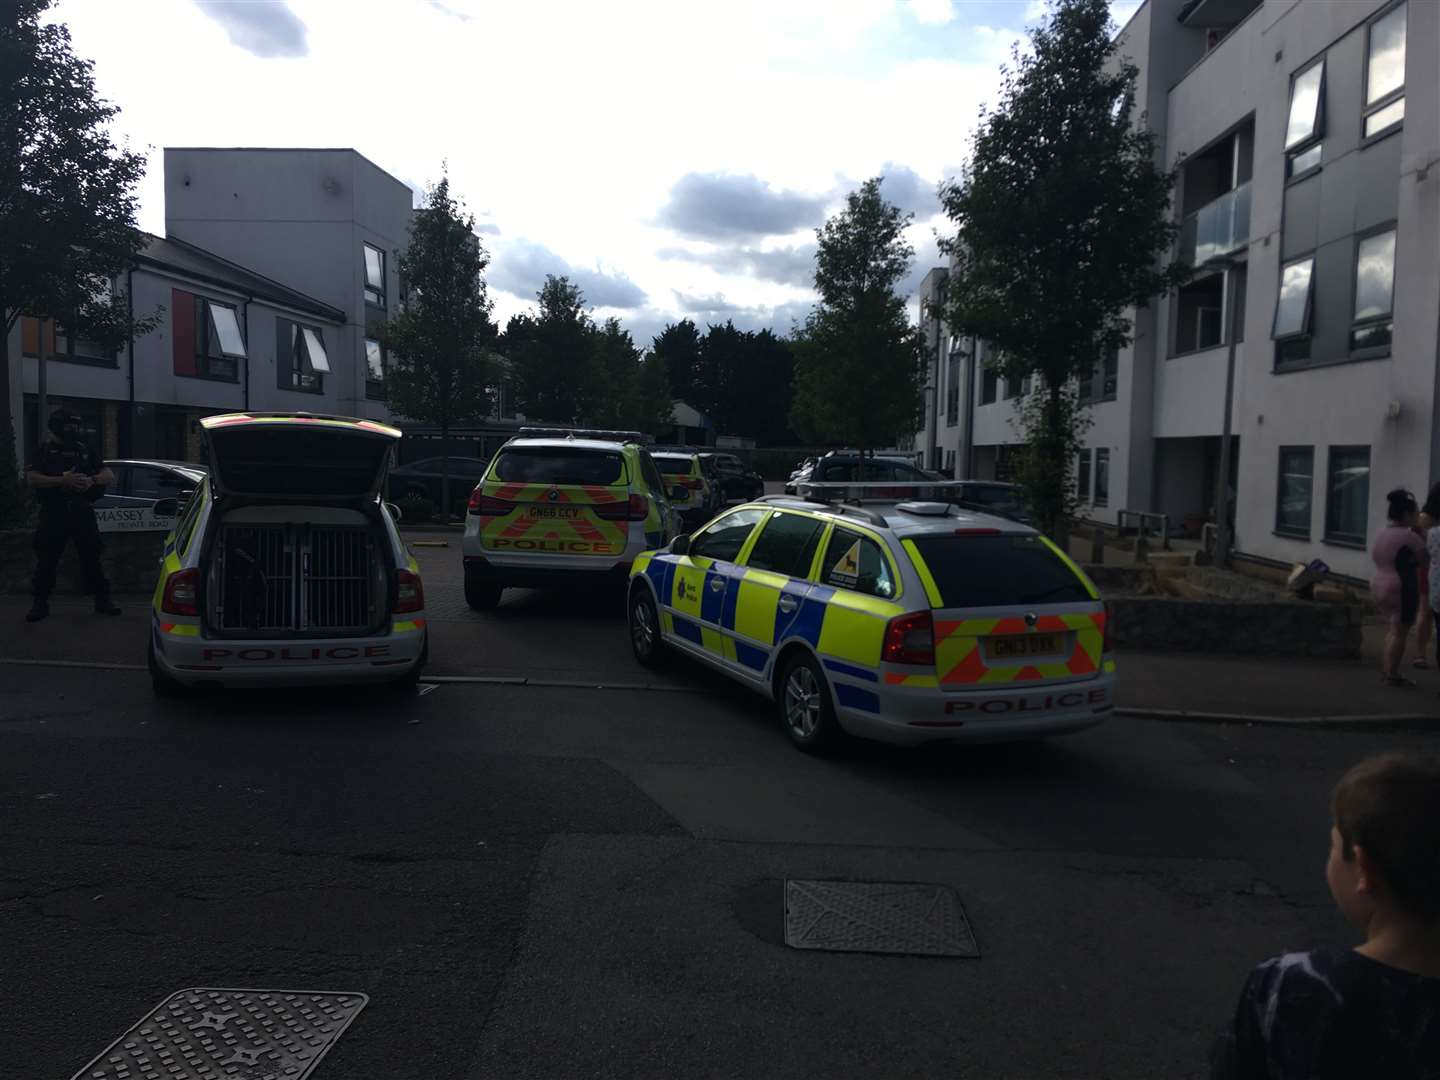 Armed police are at Massey Close (15901378)